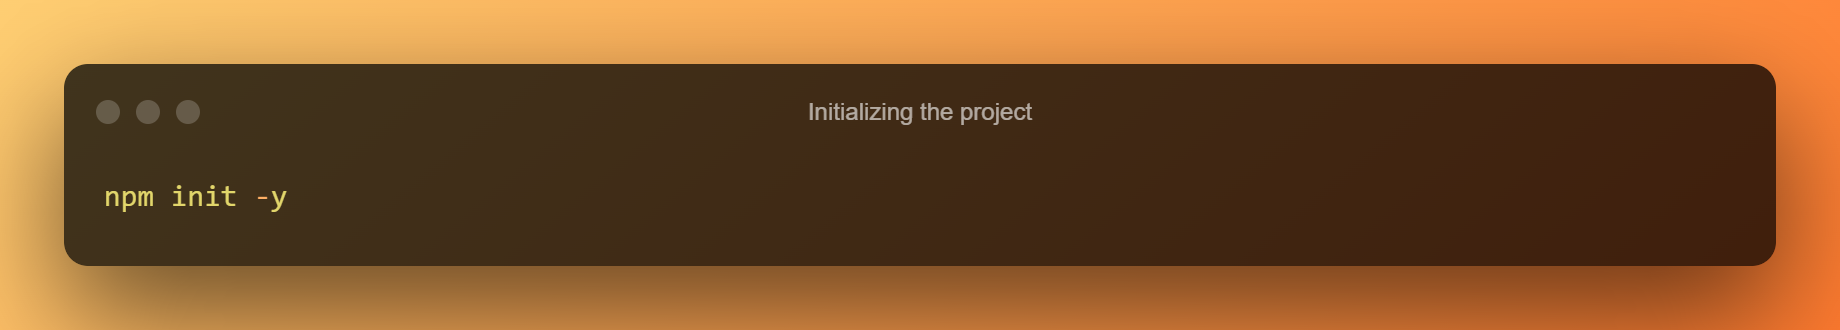 Initializing The Project